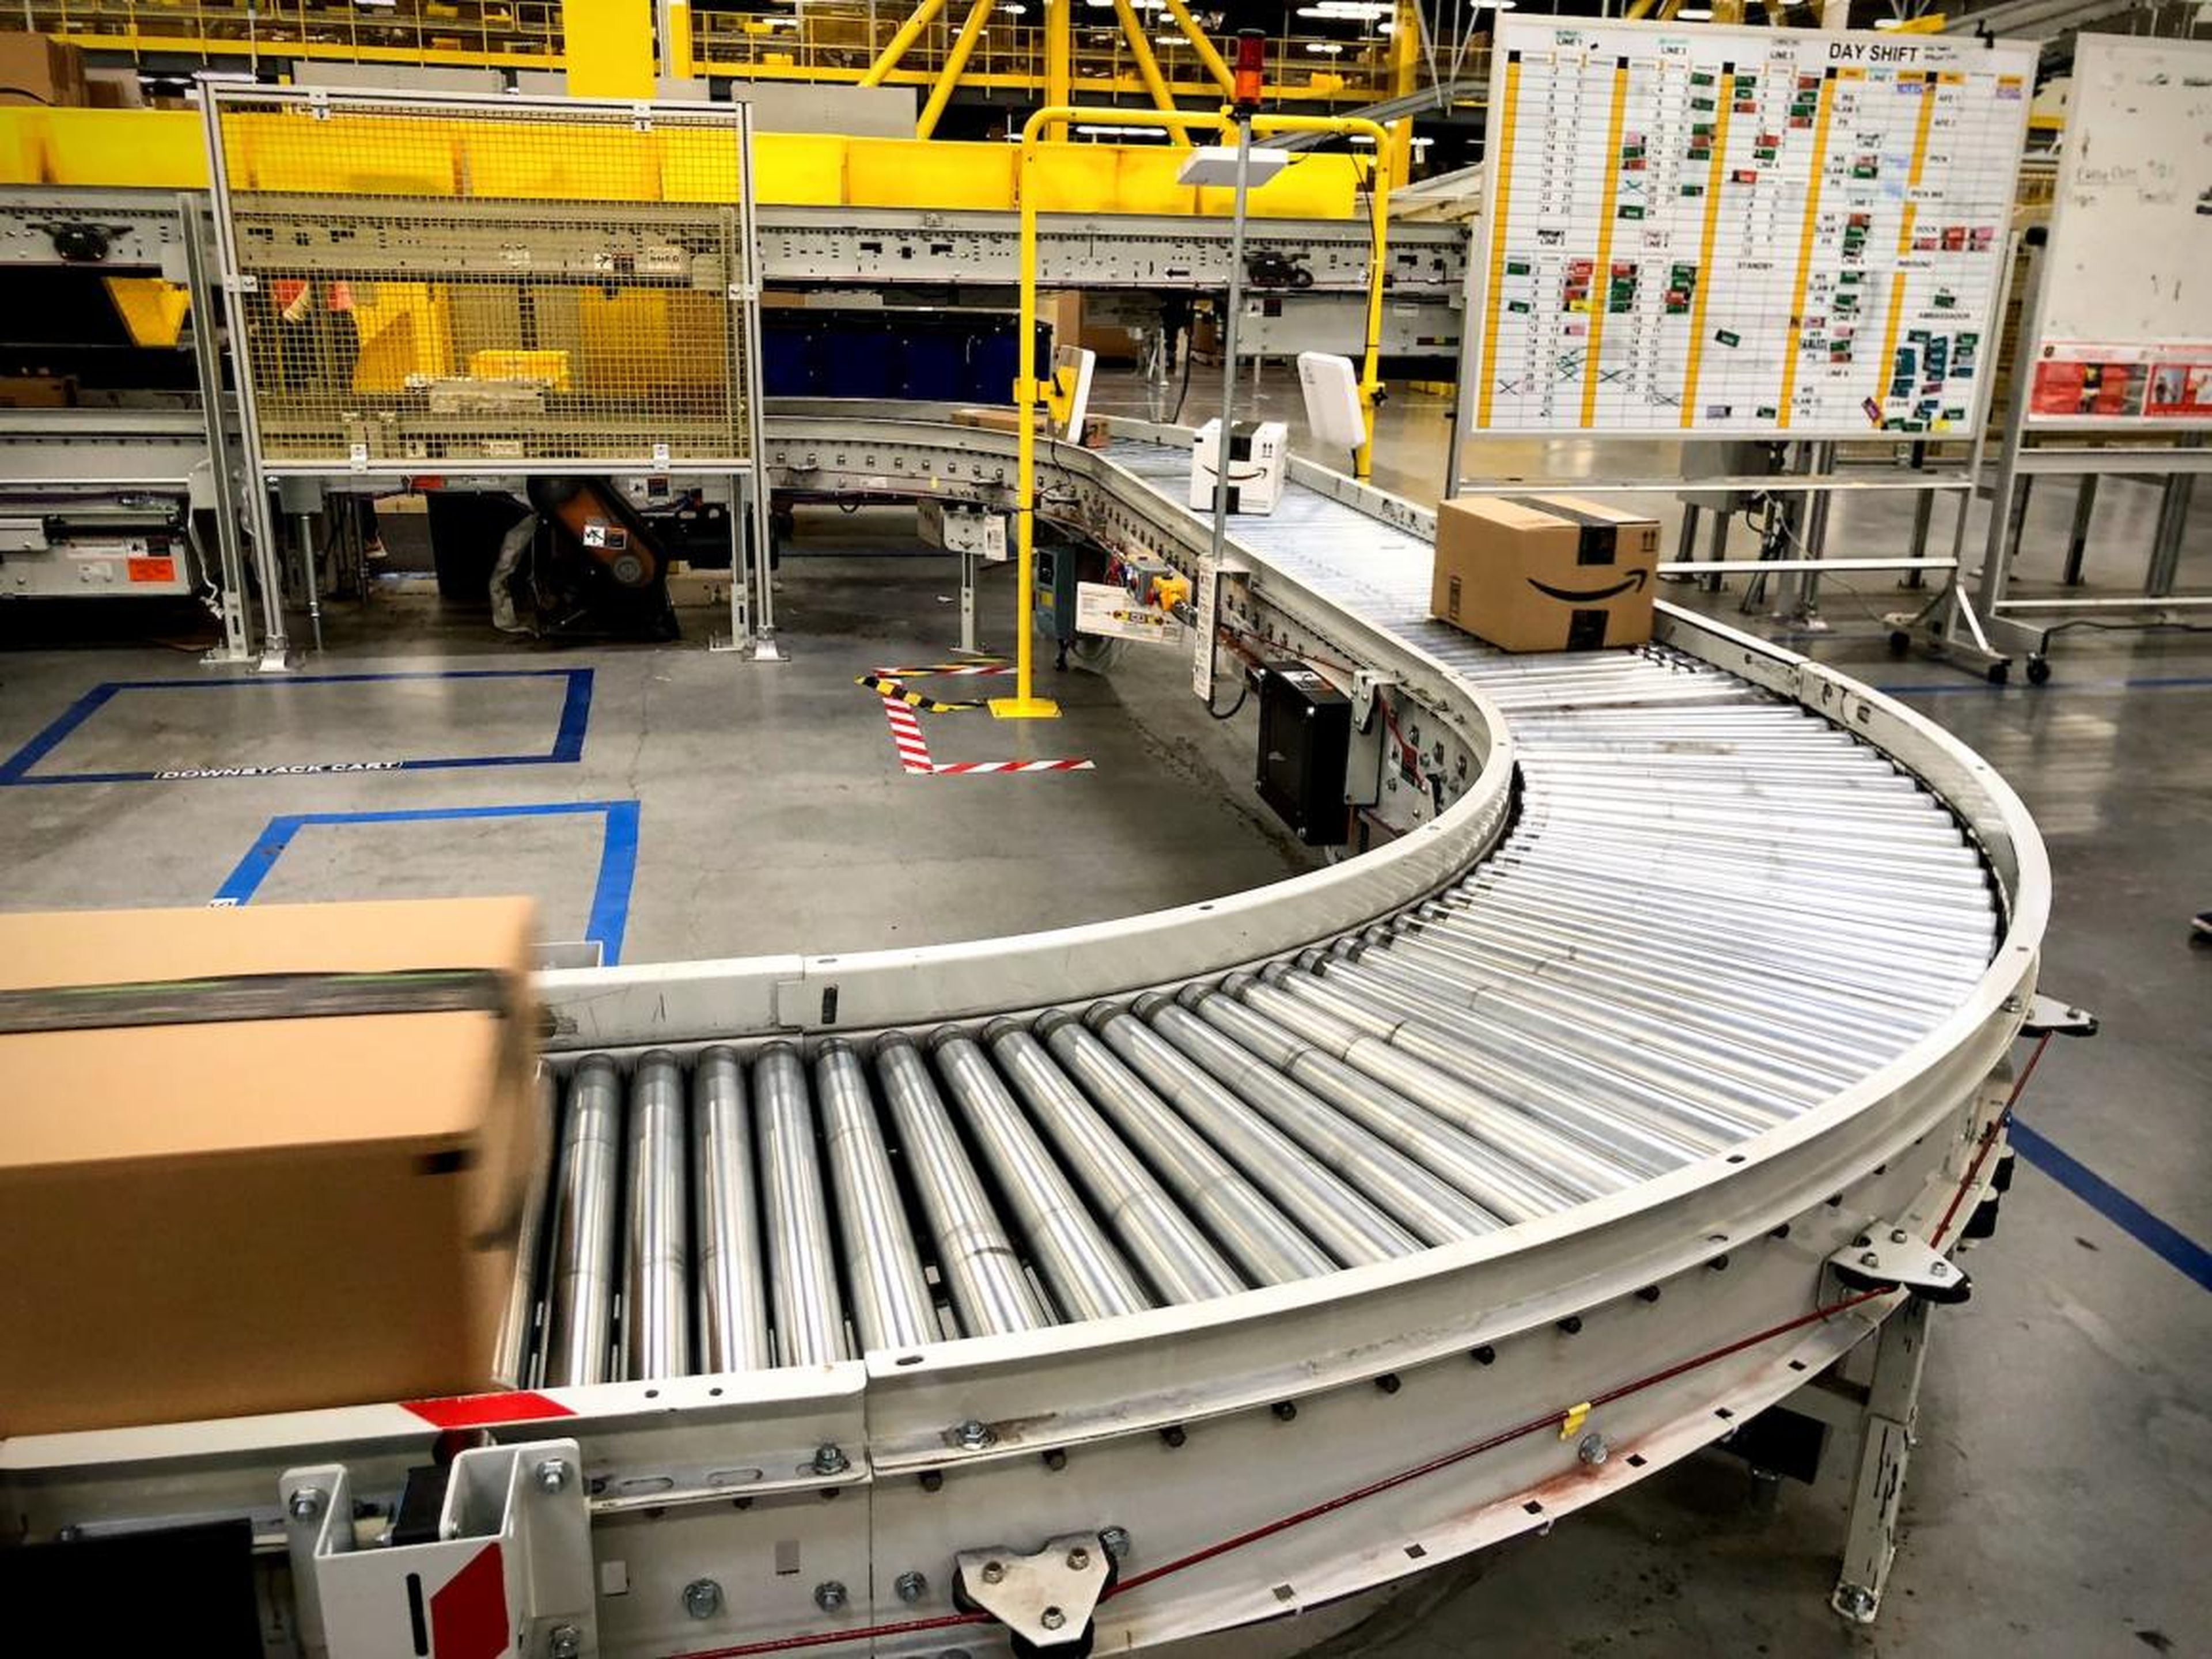 Employees will take a bin off the belt, scan it, and unpack it. Then the system will tell them what type of box they need. An employee will assemble the correct box, fill it, and send it on its way.